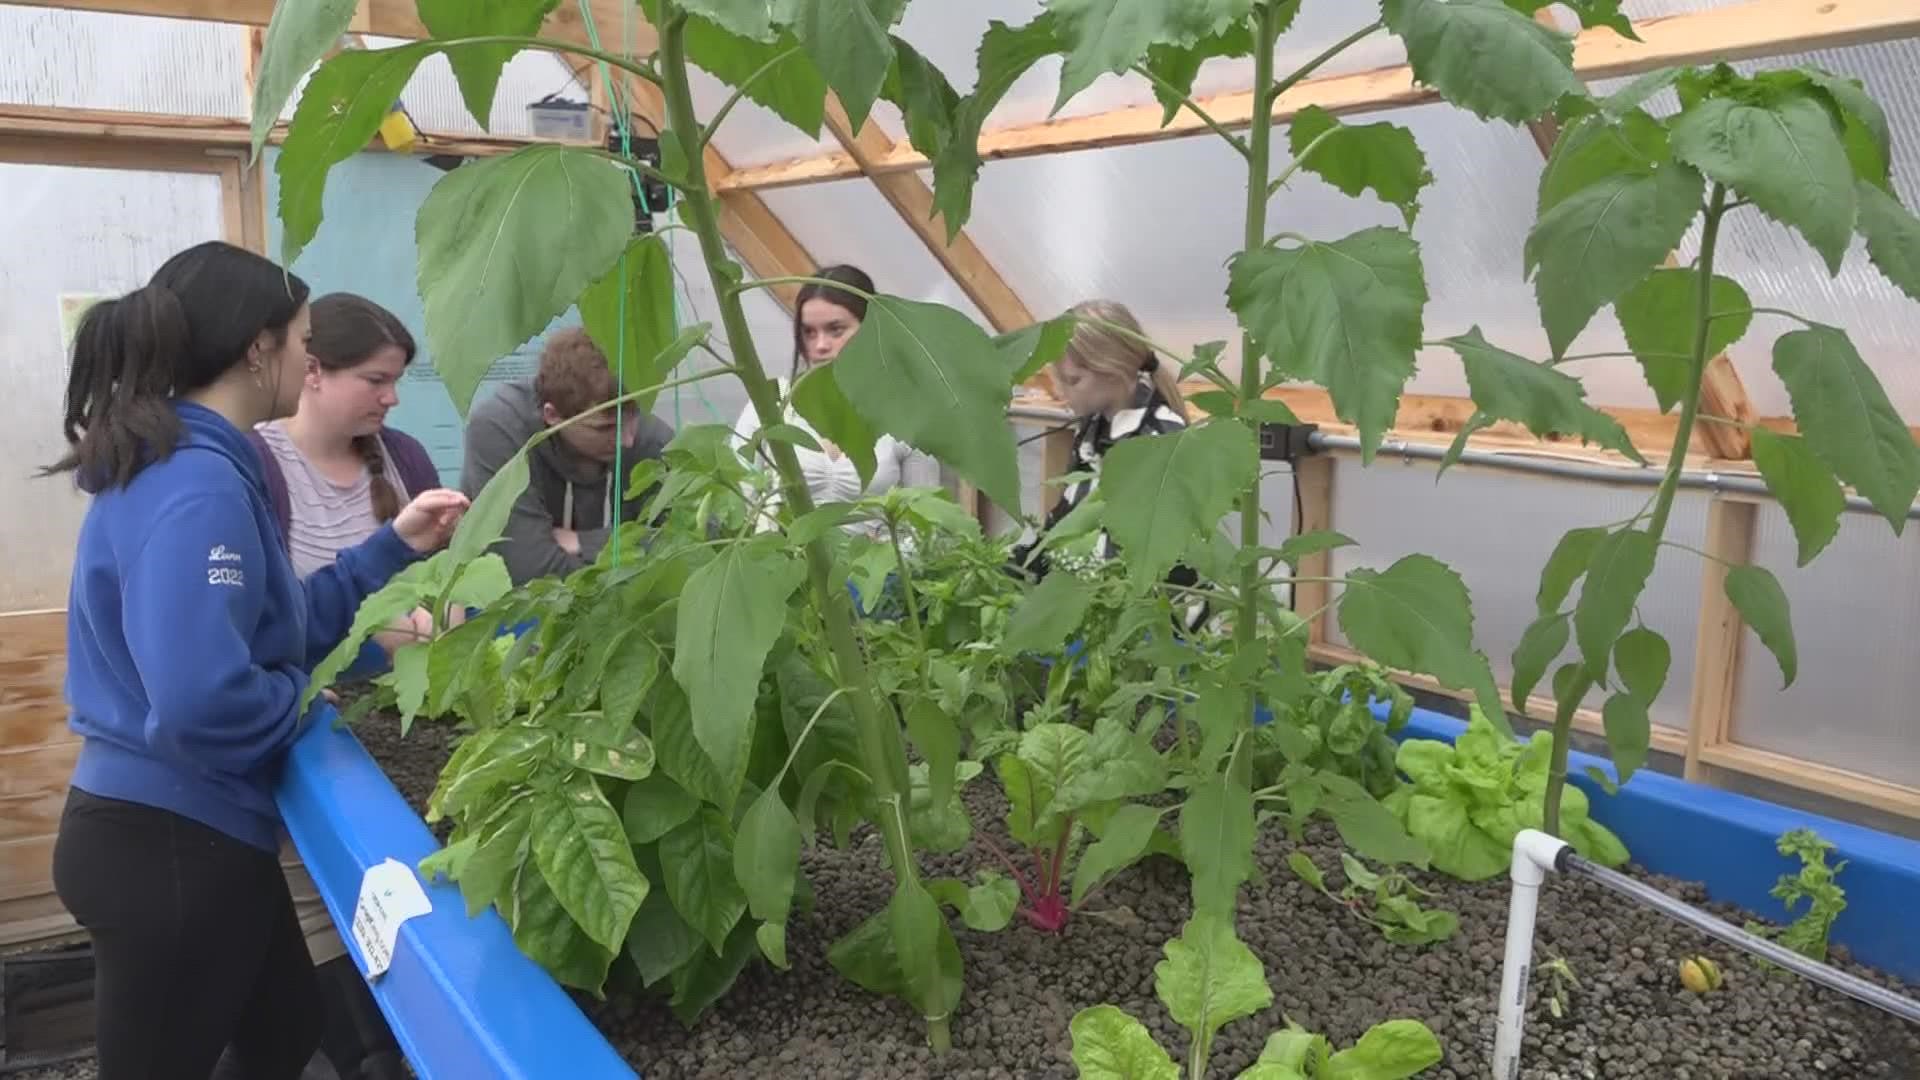 Jonesport-Beals High School is believed to have the only full-time teacher in Maine dedicated to teaching students about aquaponics and aquaculture.